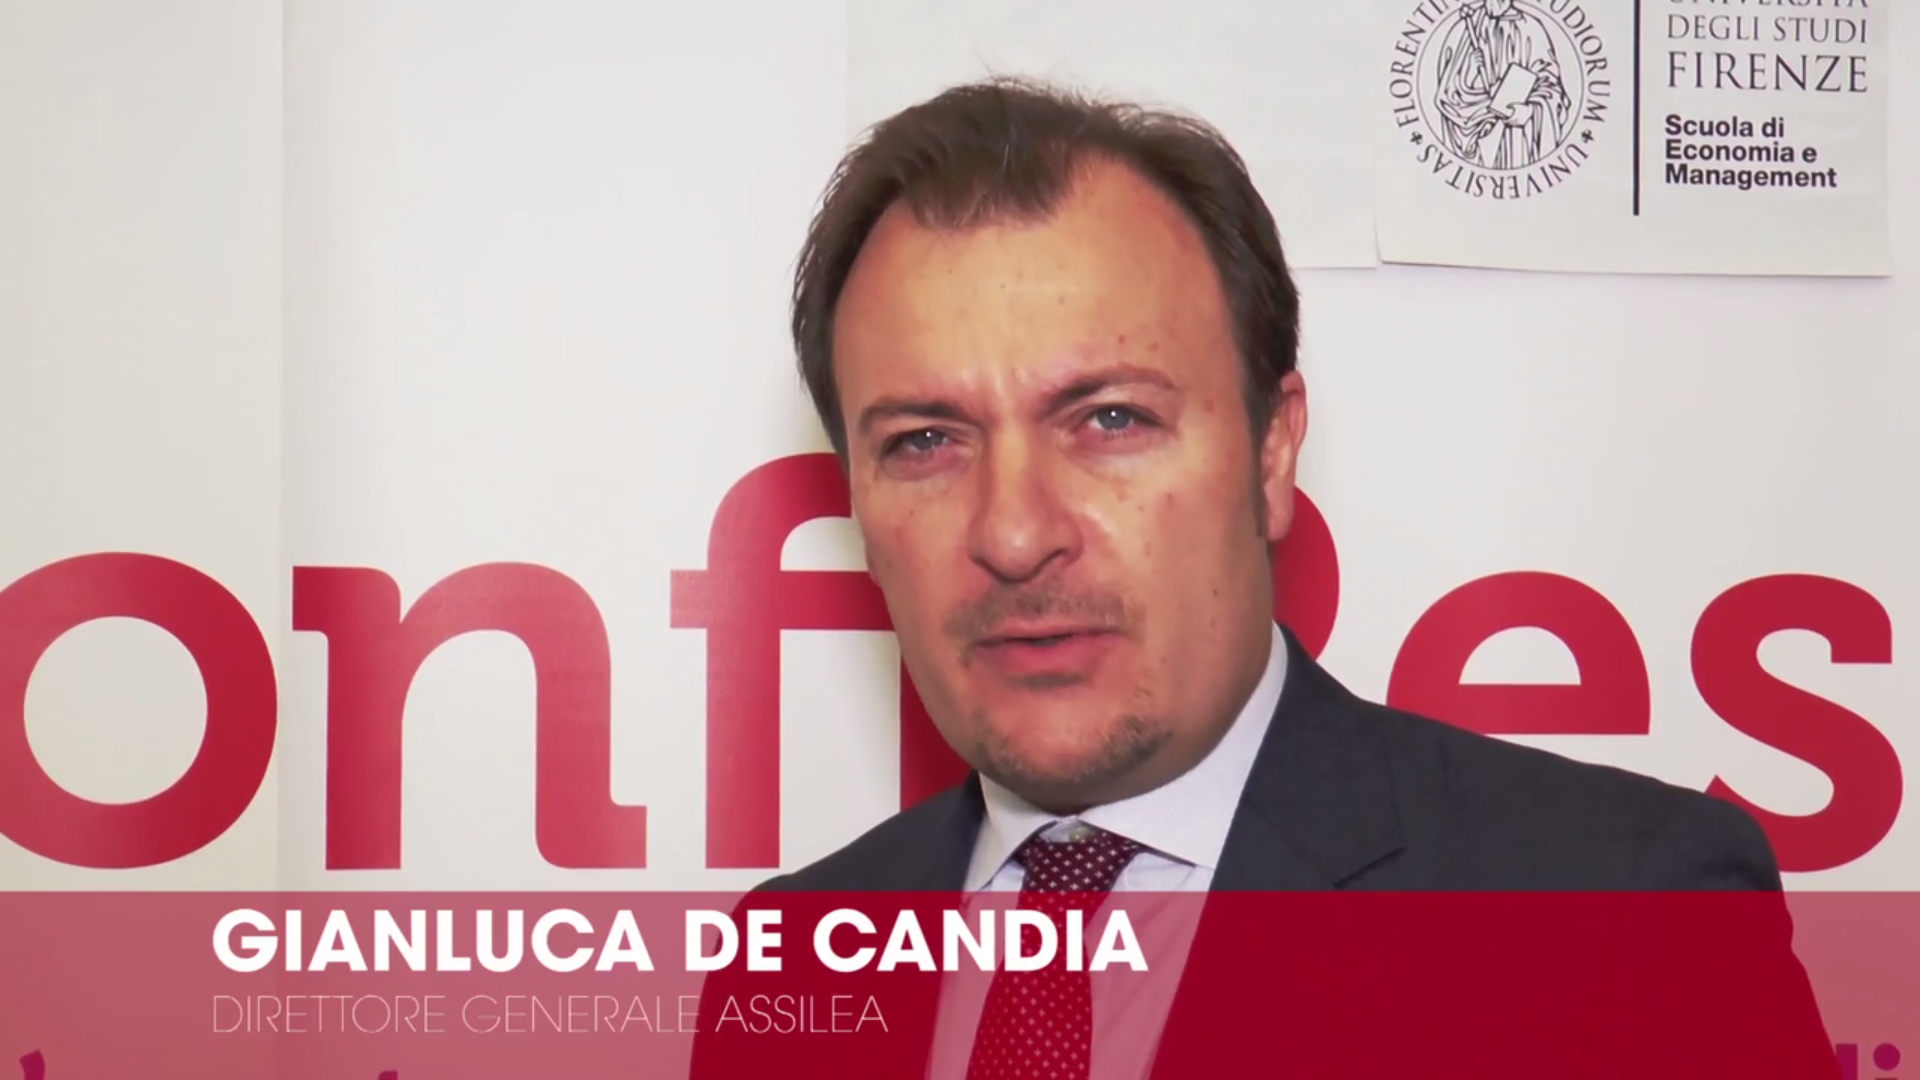 Gianluca De Candia entra in Banca IFIS, come Responsabile Gestione Commerciale Leasing